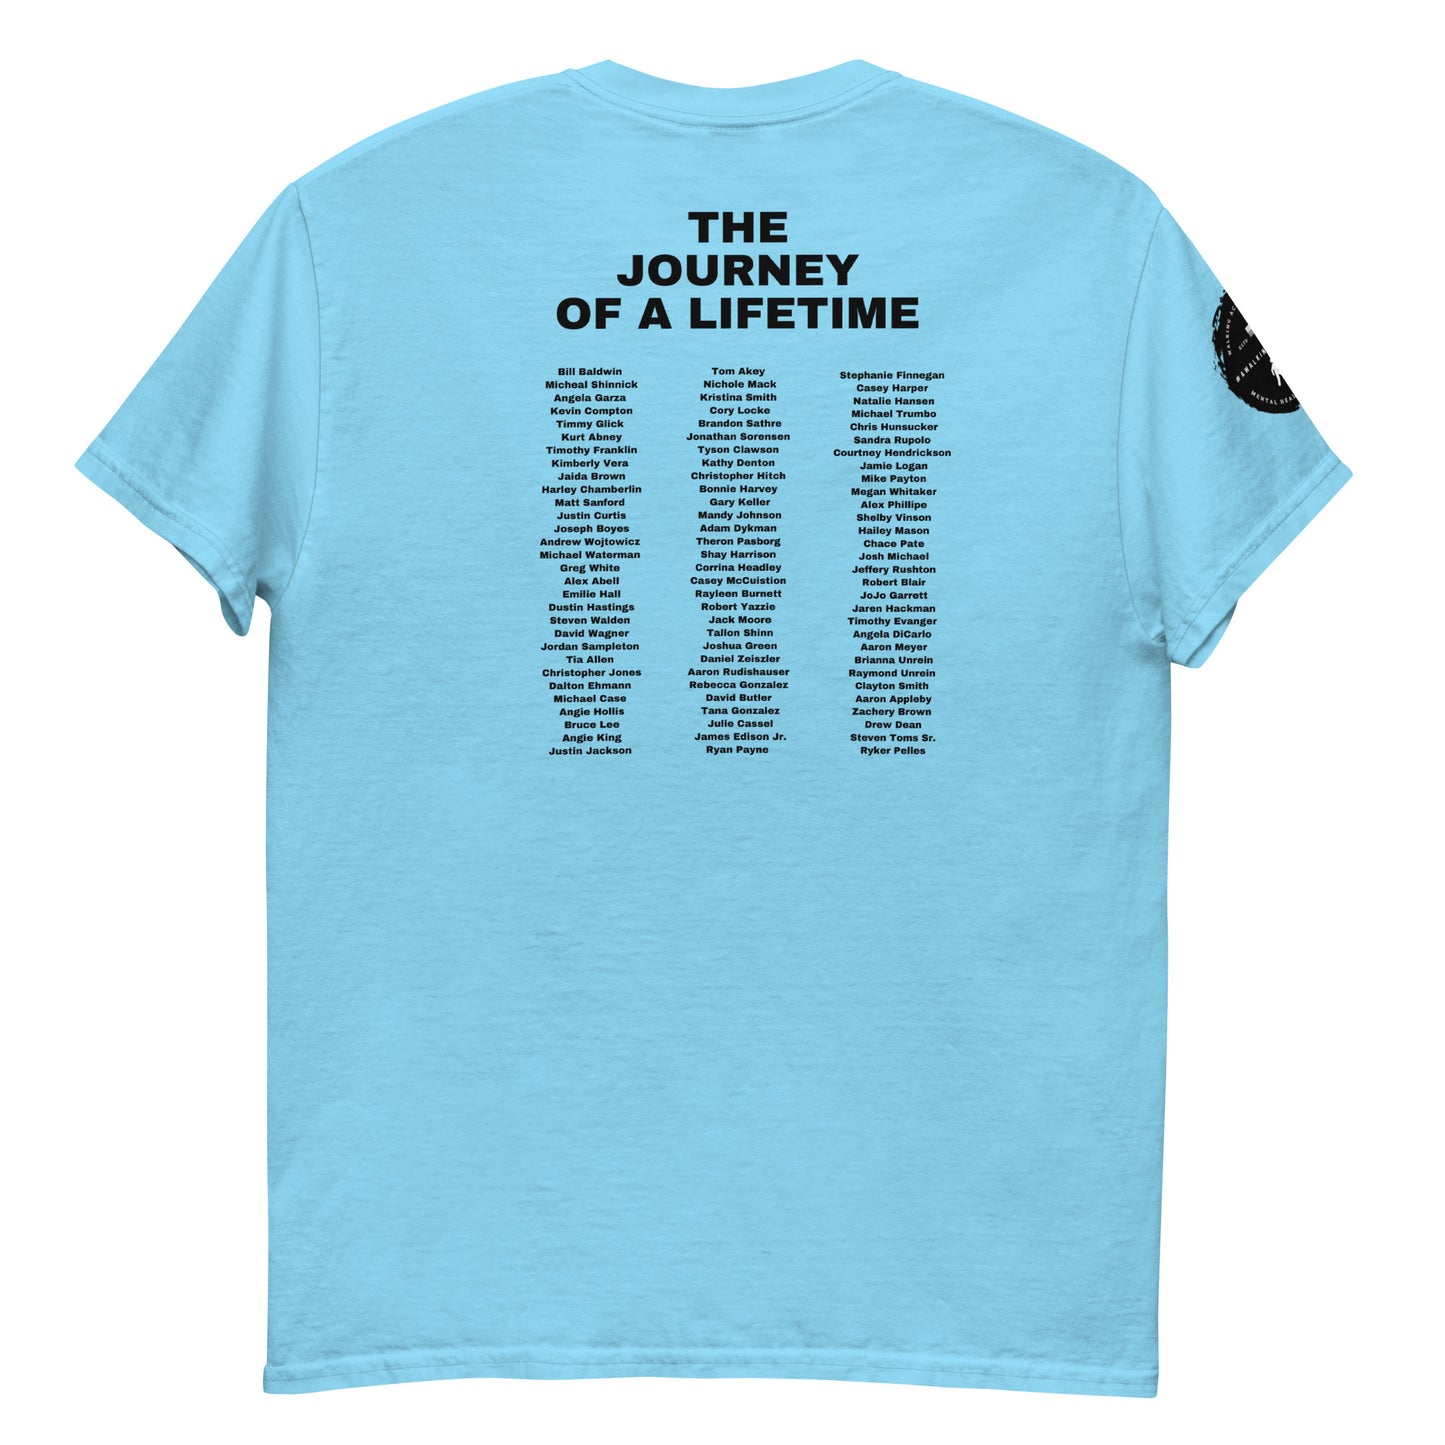 Official A Walking Testimony Shirt Edition 2 (Light Colors)